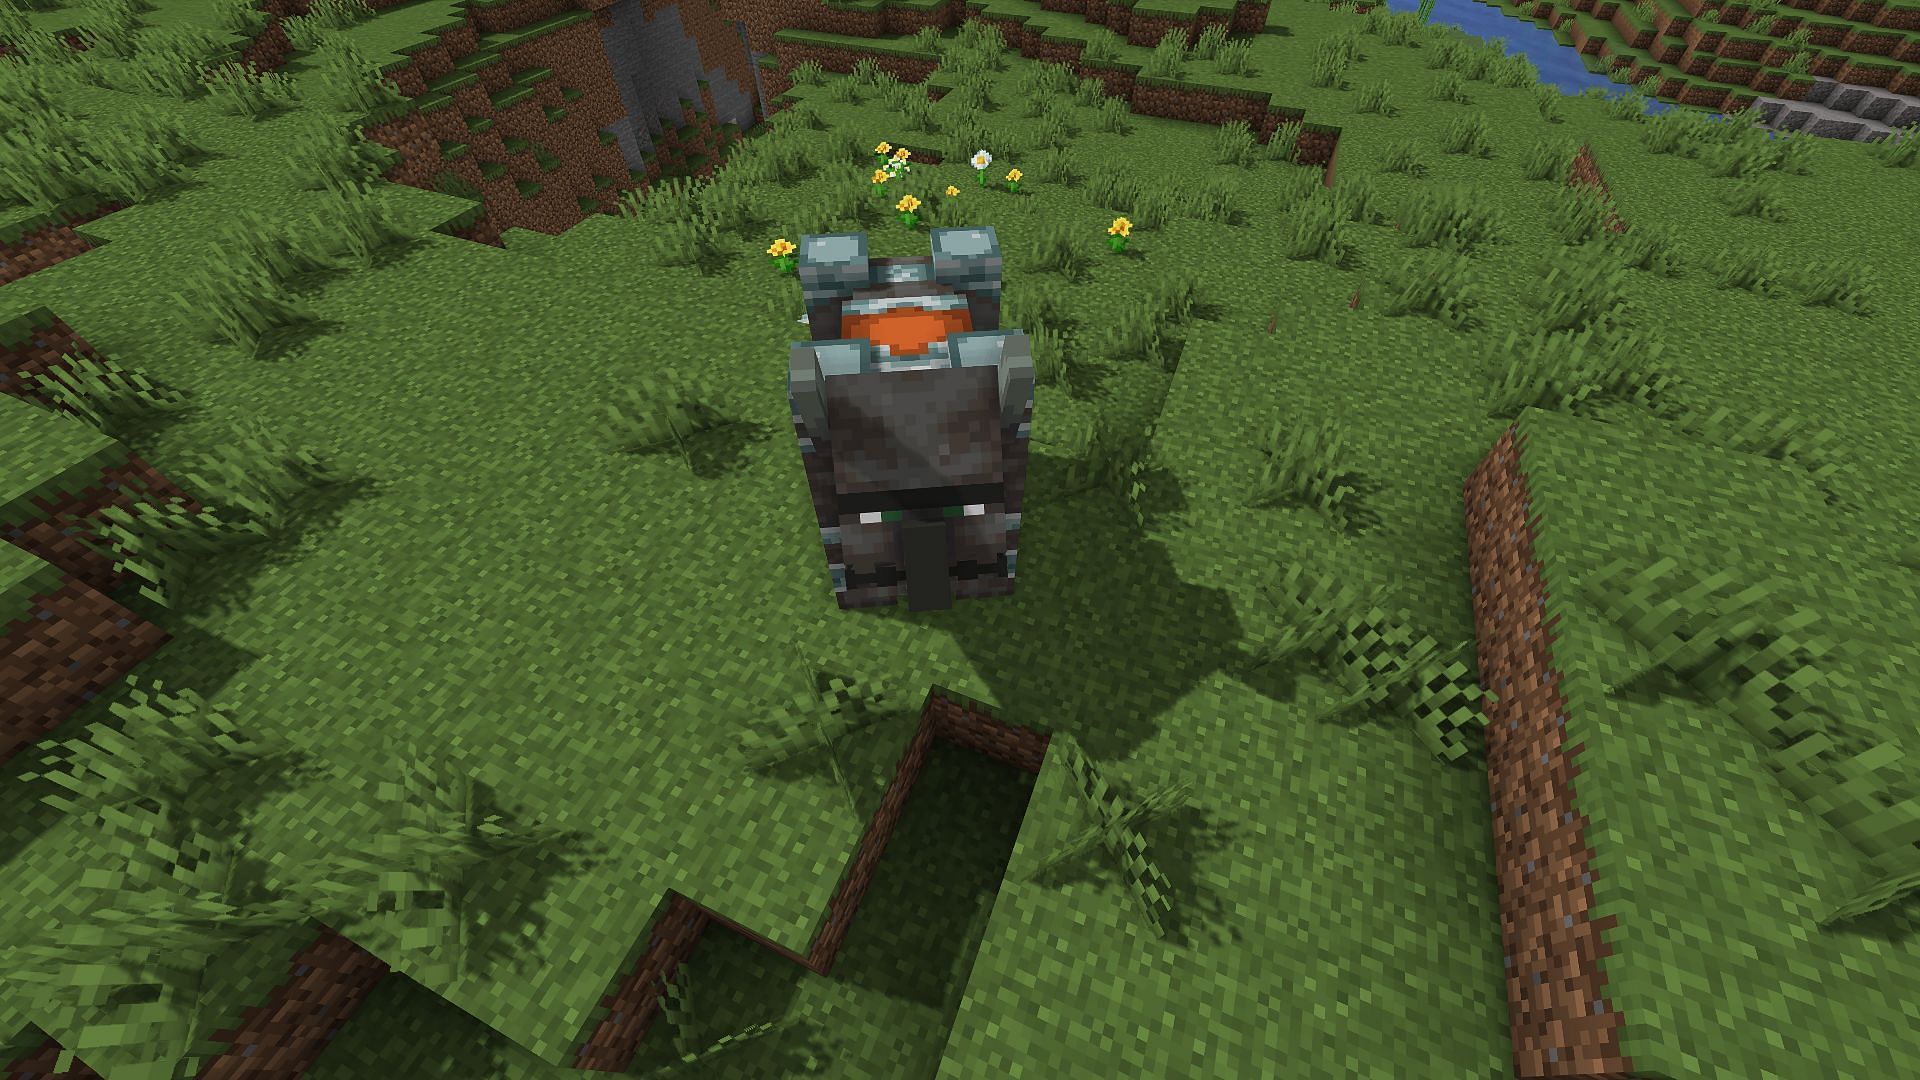 A Ravager, who will always drop a saddle when killed (Image via Minecraft)